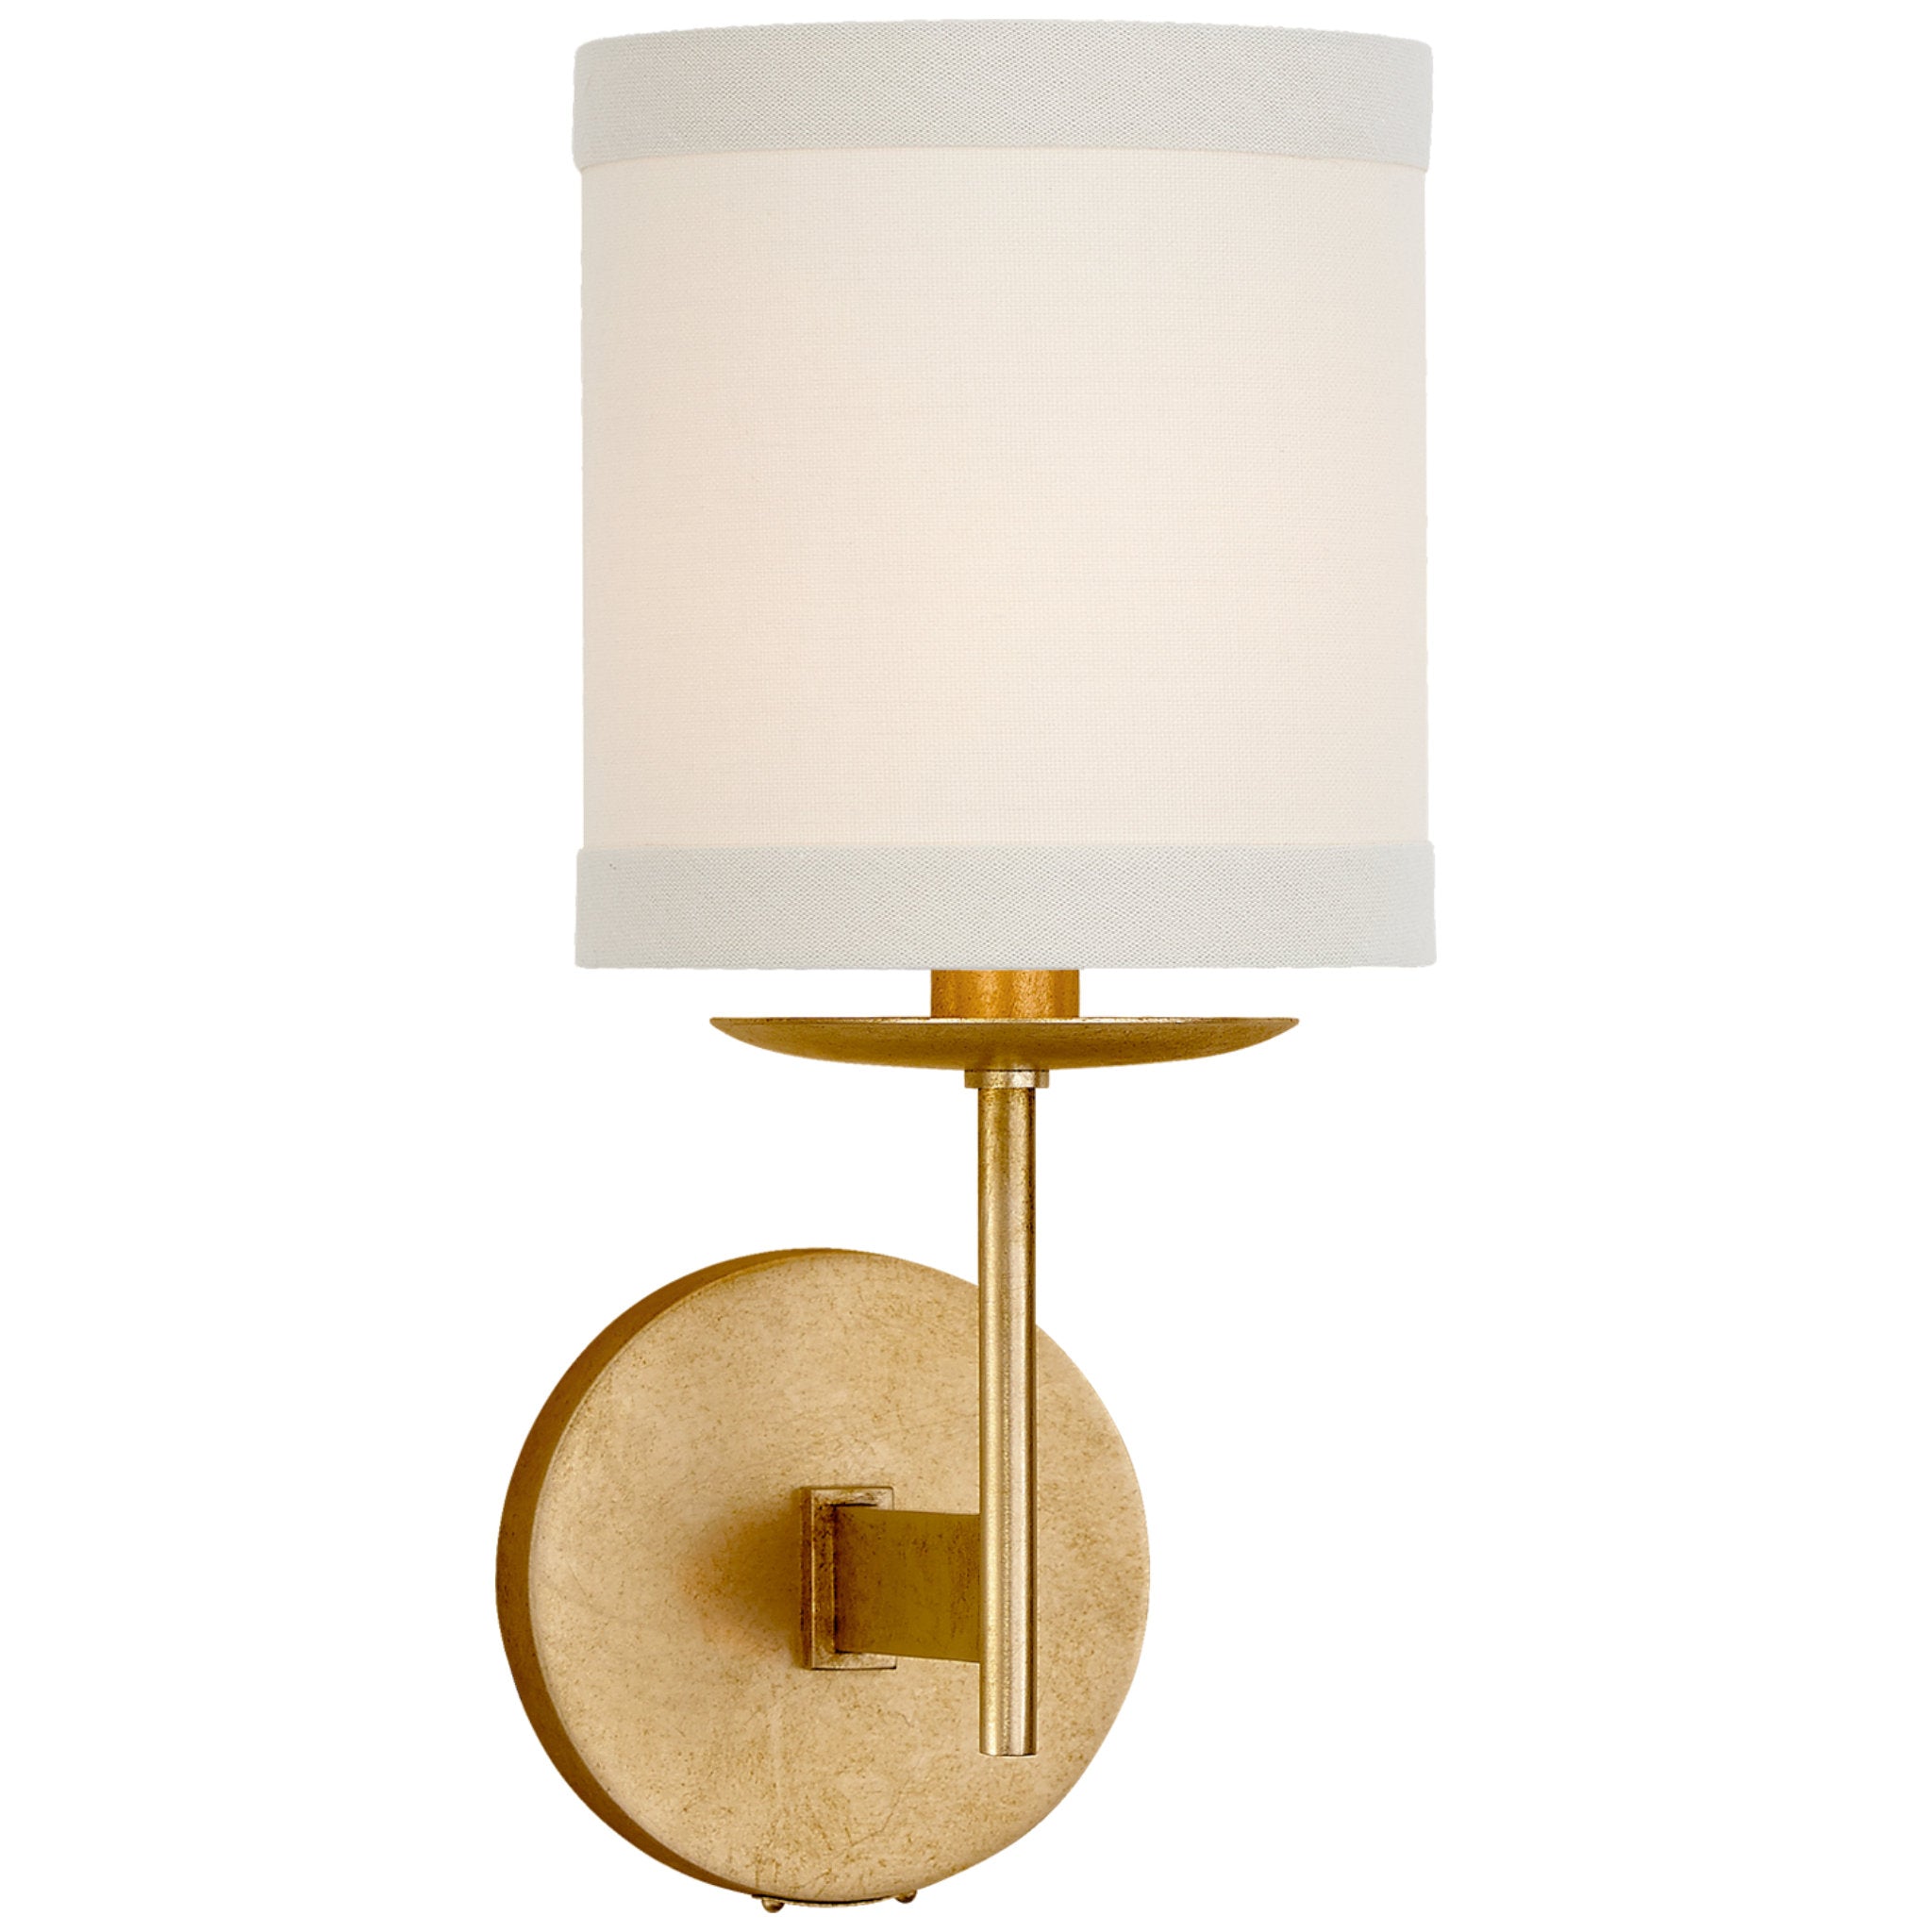 kate spade new york Walker Small Sconce in Gild with Cream Linen Shade